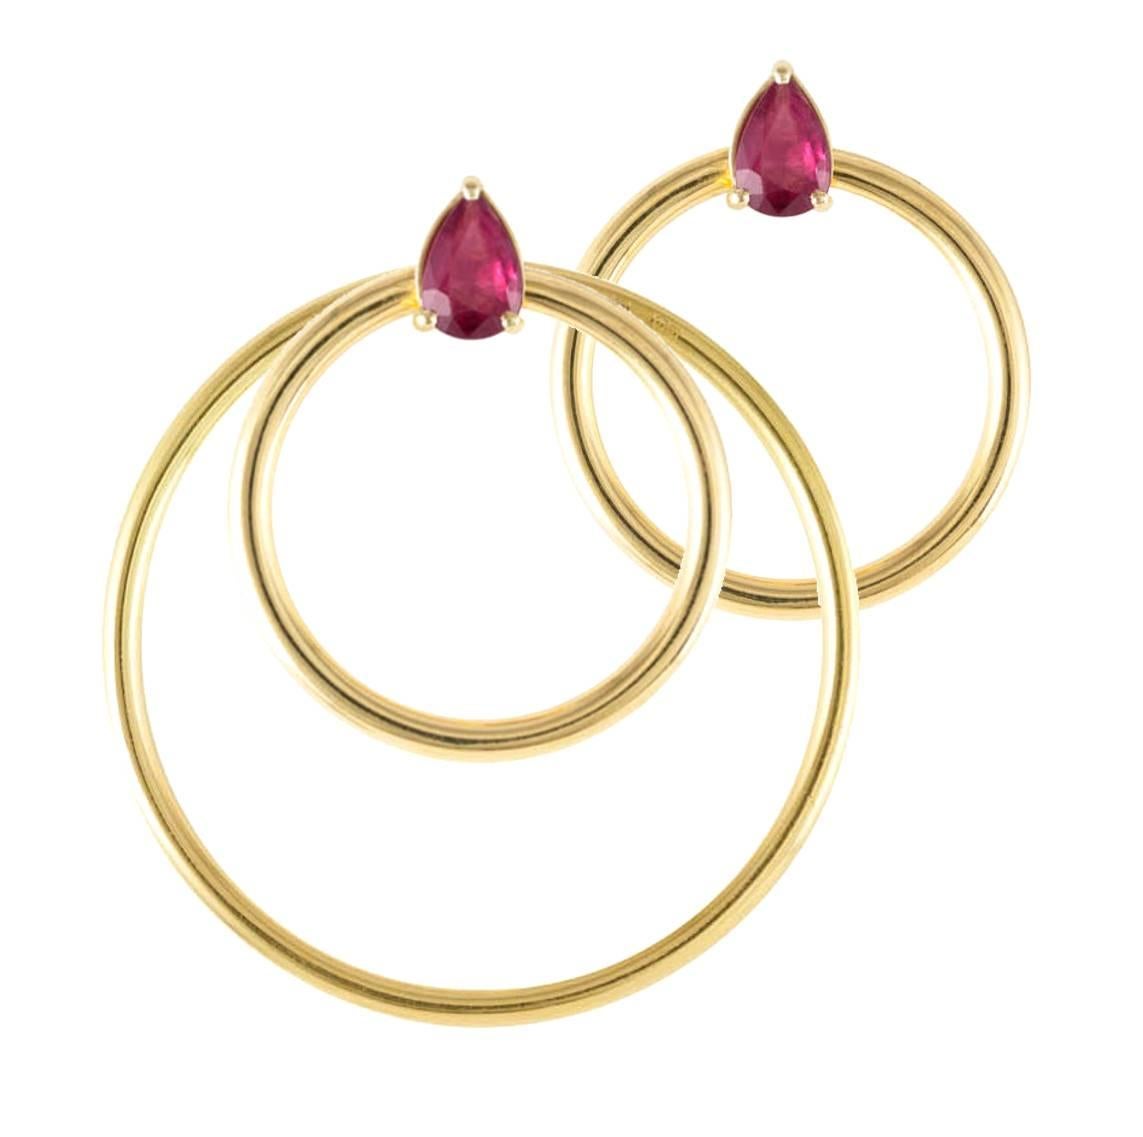 Ruby and yellow gold small front facing hoop earrings. Simple chic earrings set with pear cut rubies in yellow gold. Perfectly geometrically balanced to be pleasingly elegant and flattering. A perfect complement to the Quanta collection and